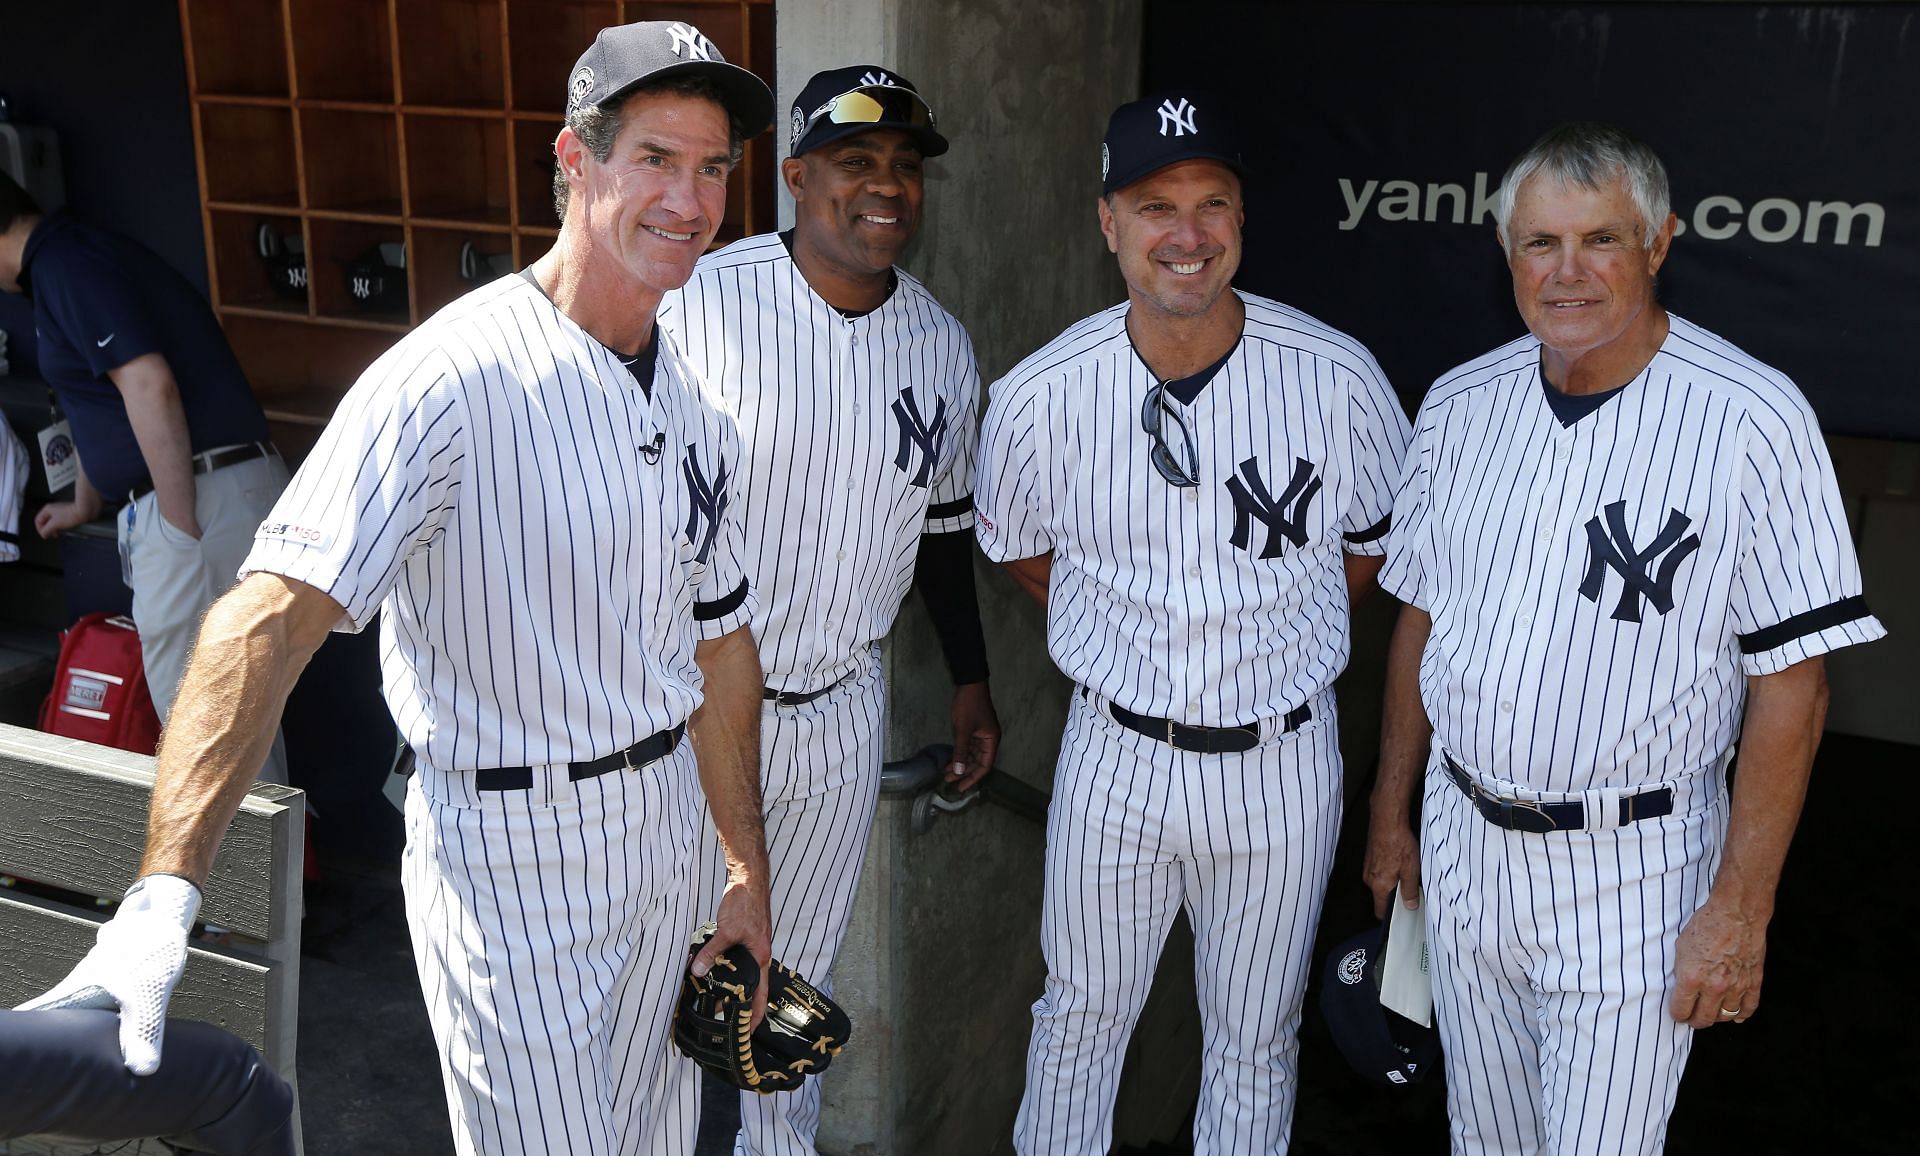 NY Yankees' young stars upstaged on Old-Timers' Day in loss to Rays